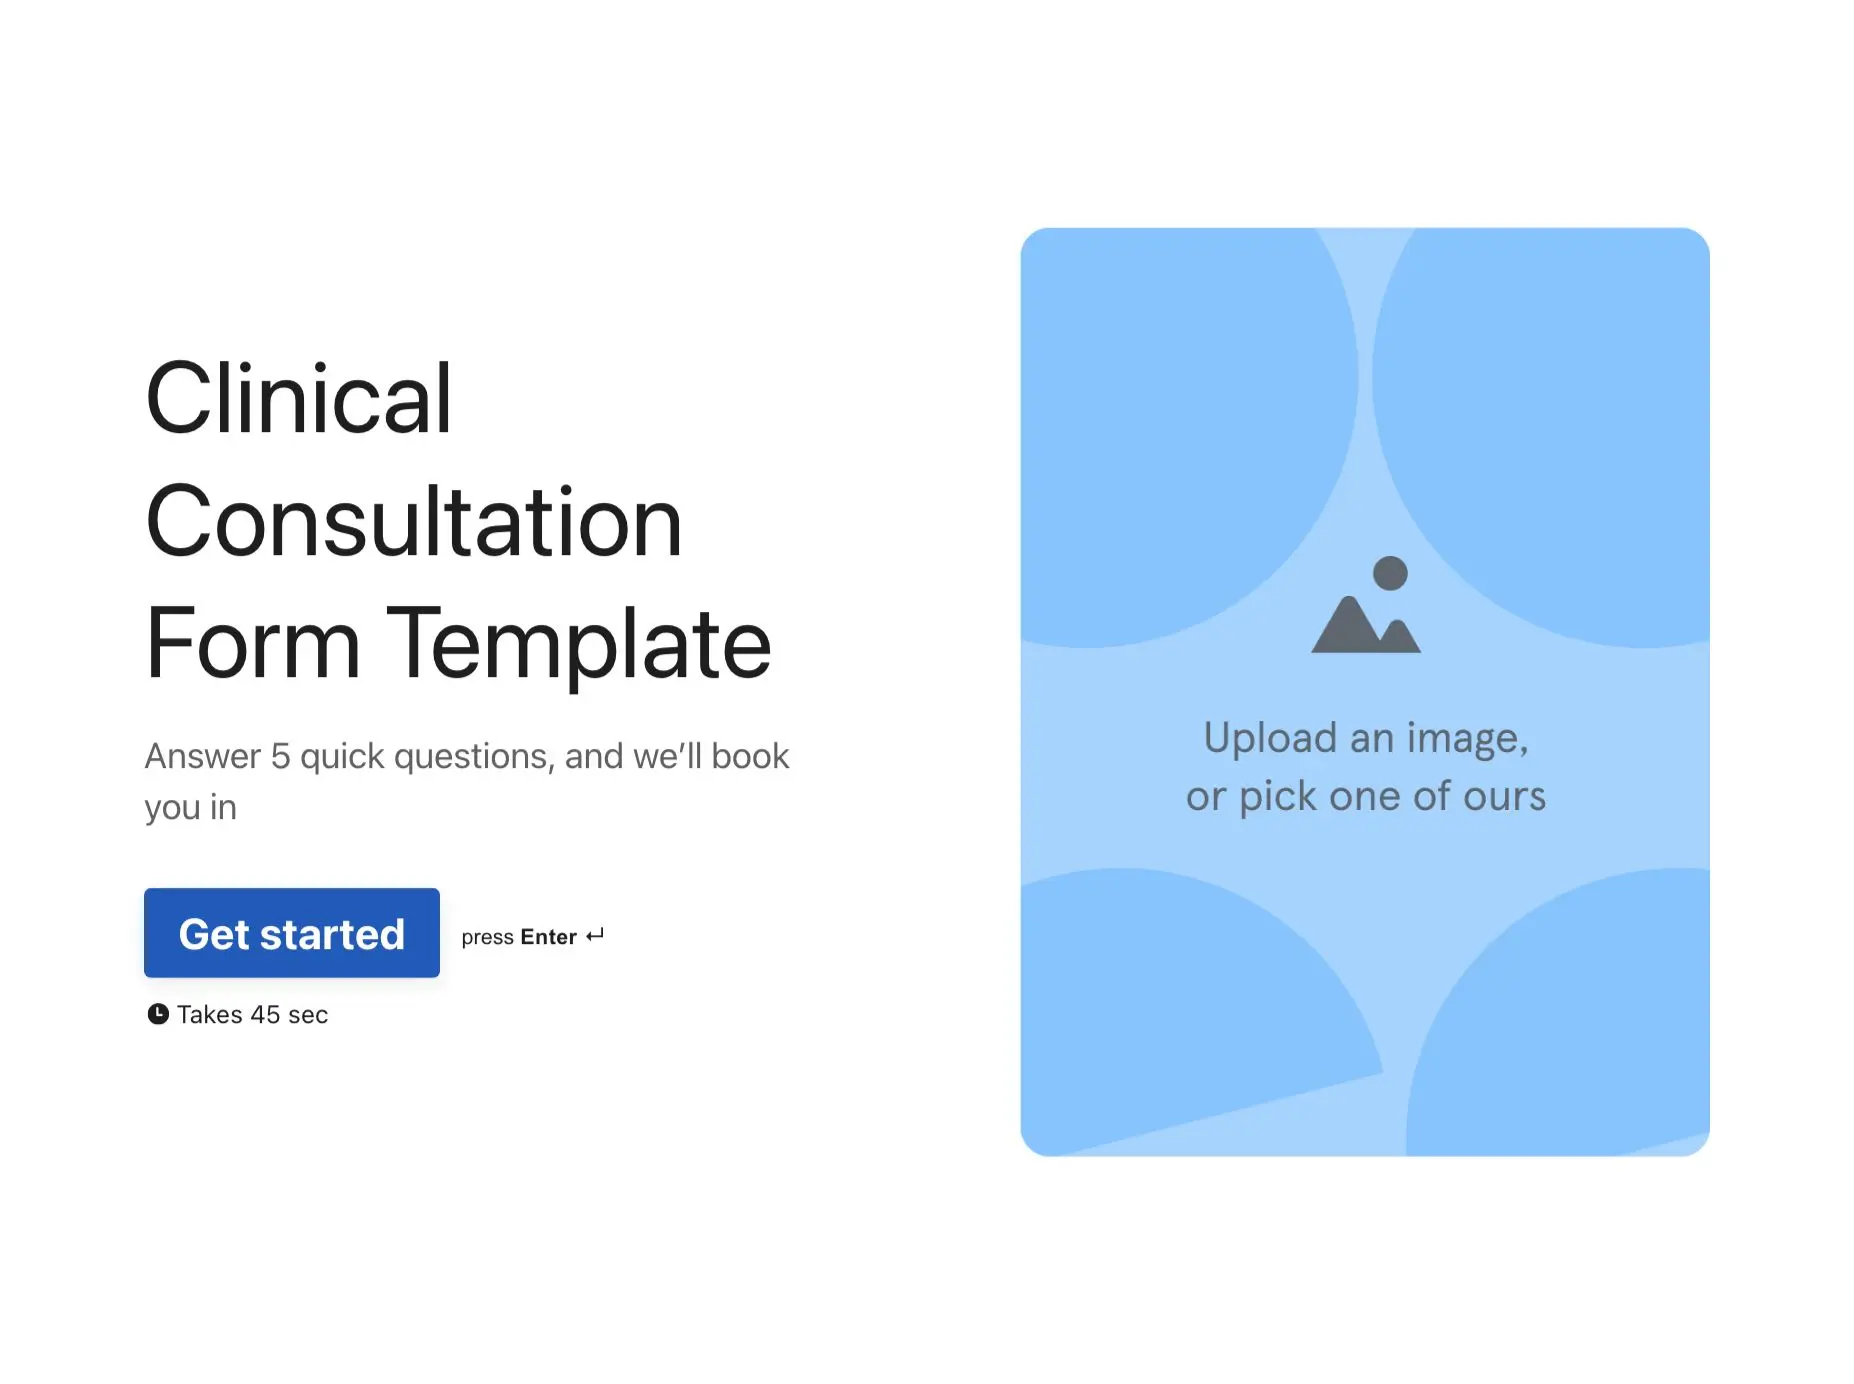 Clinical Consultation Form Template Hero